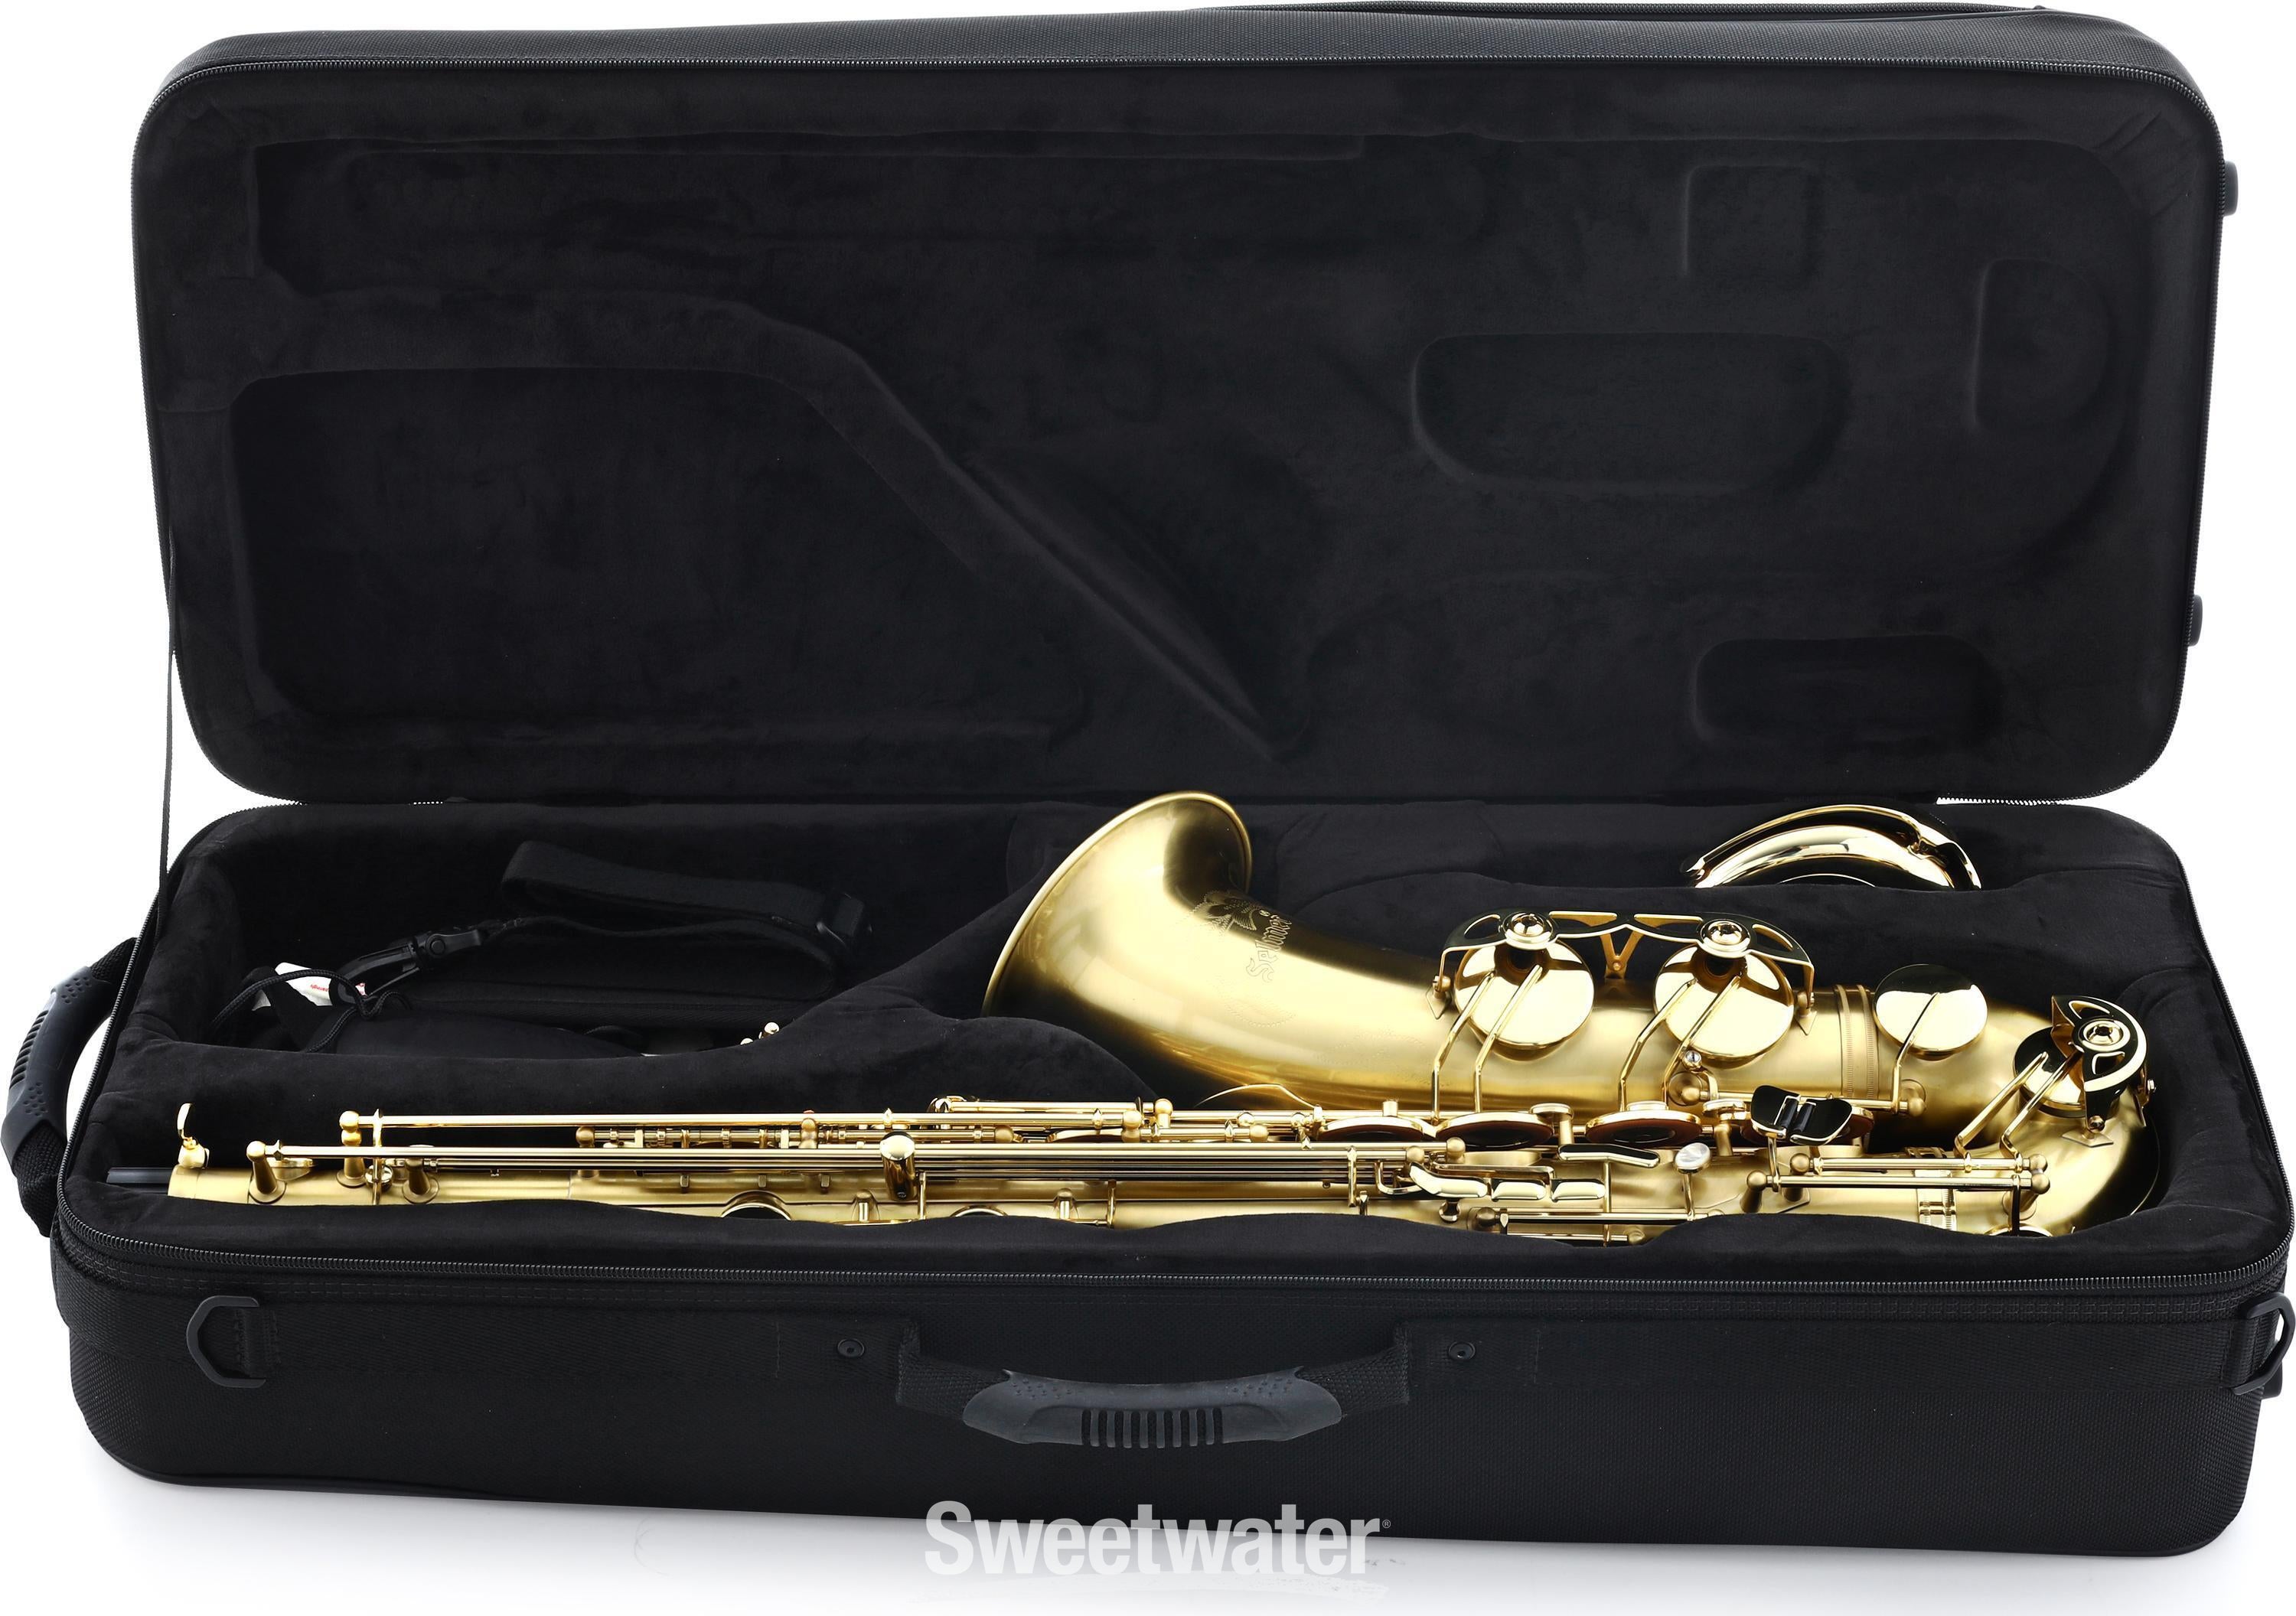 Selmer STS711 Professional Tenor Saxophone - Matte | Sweetwater